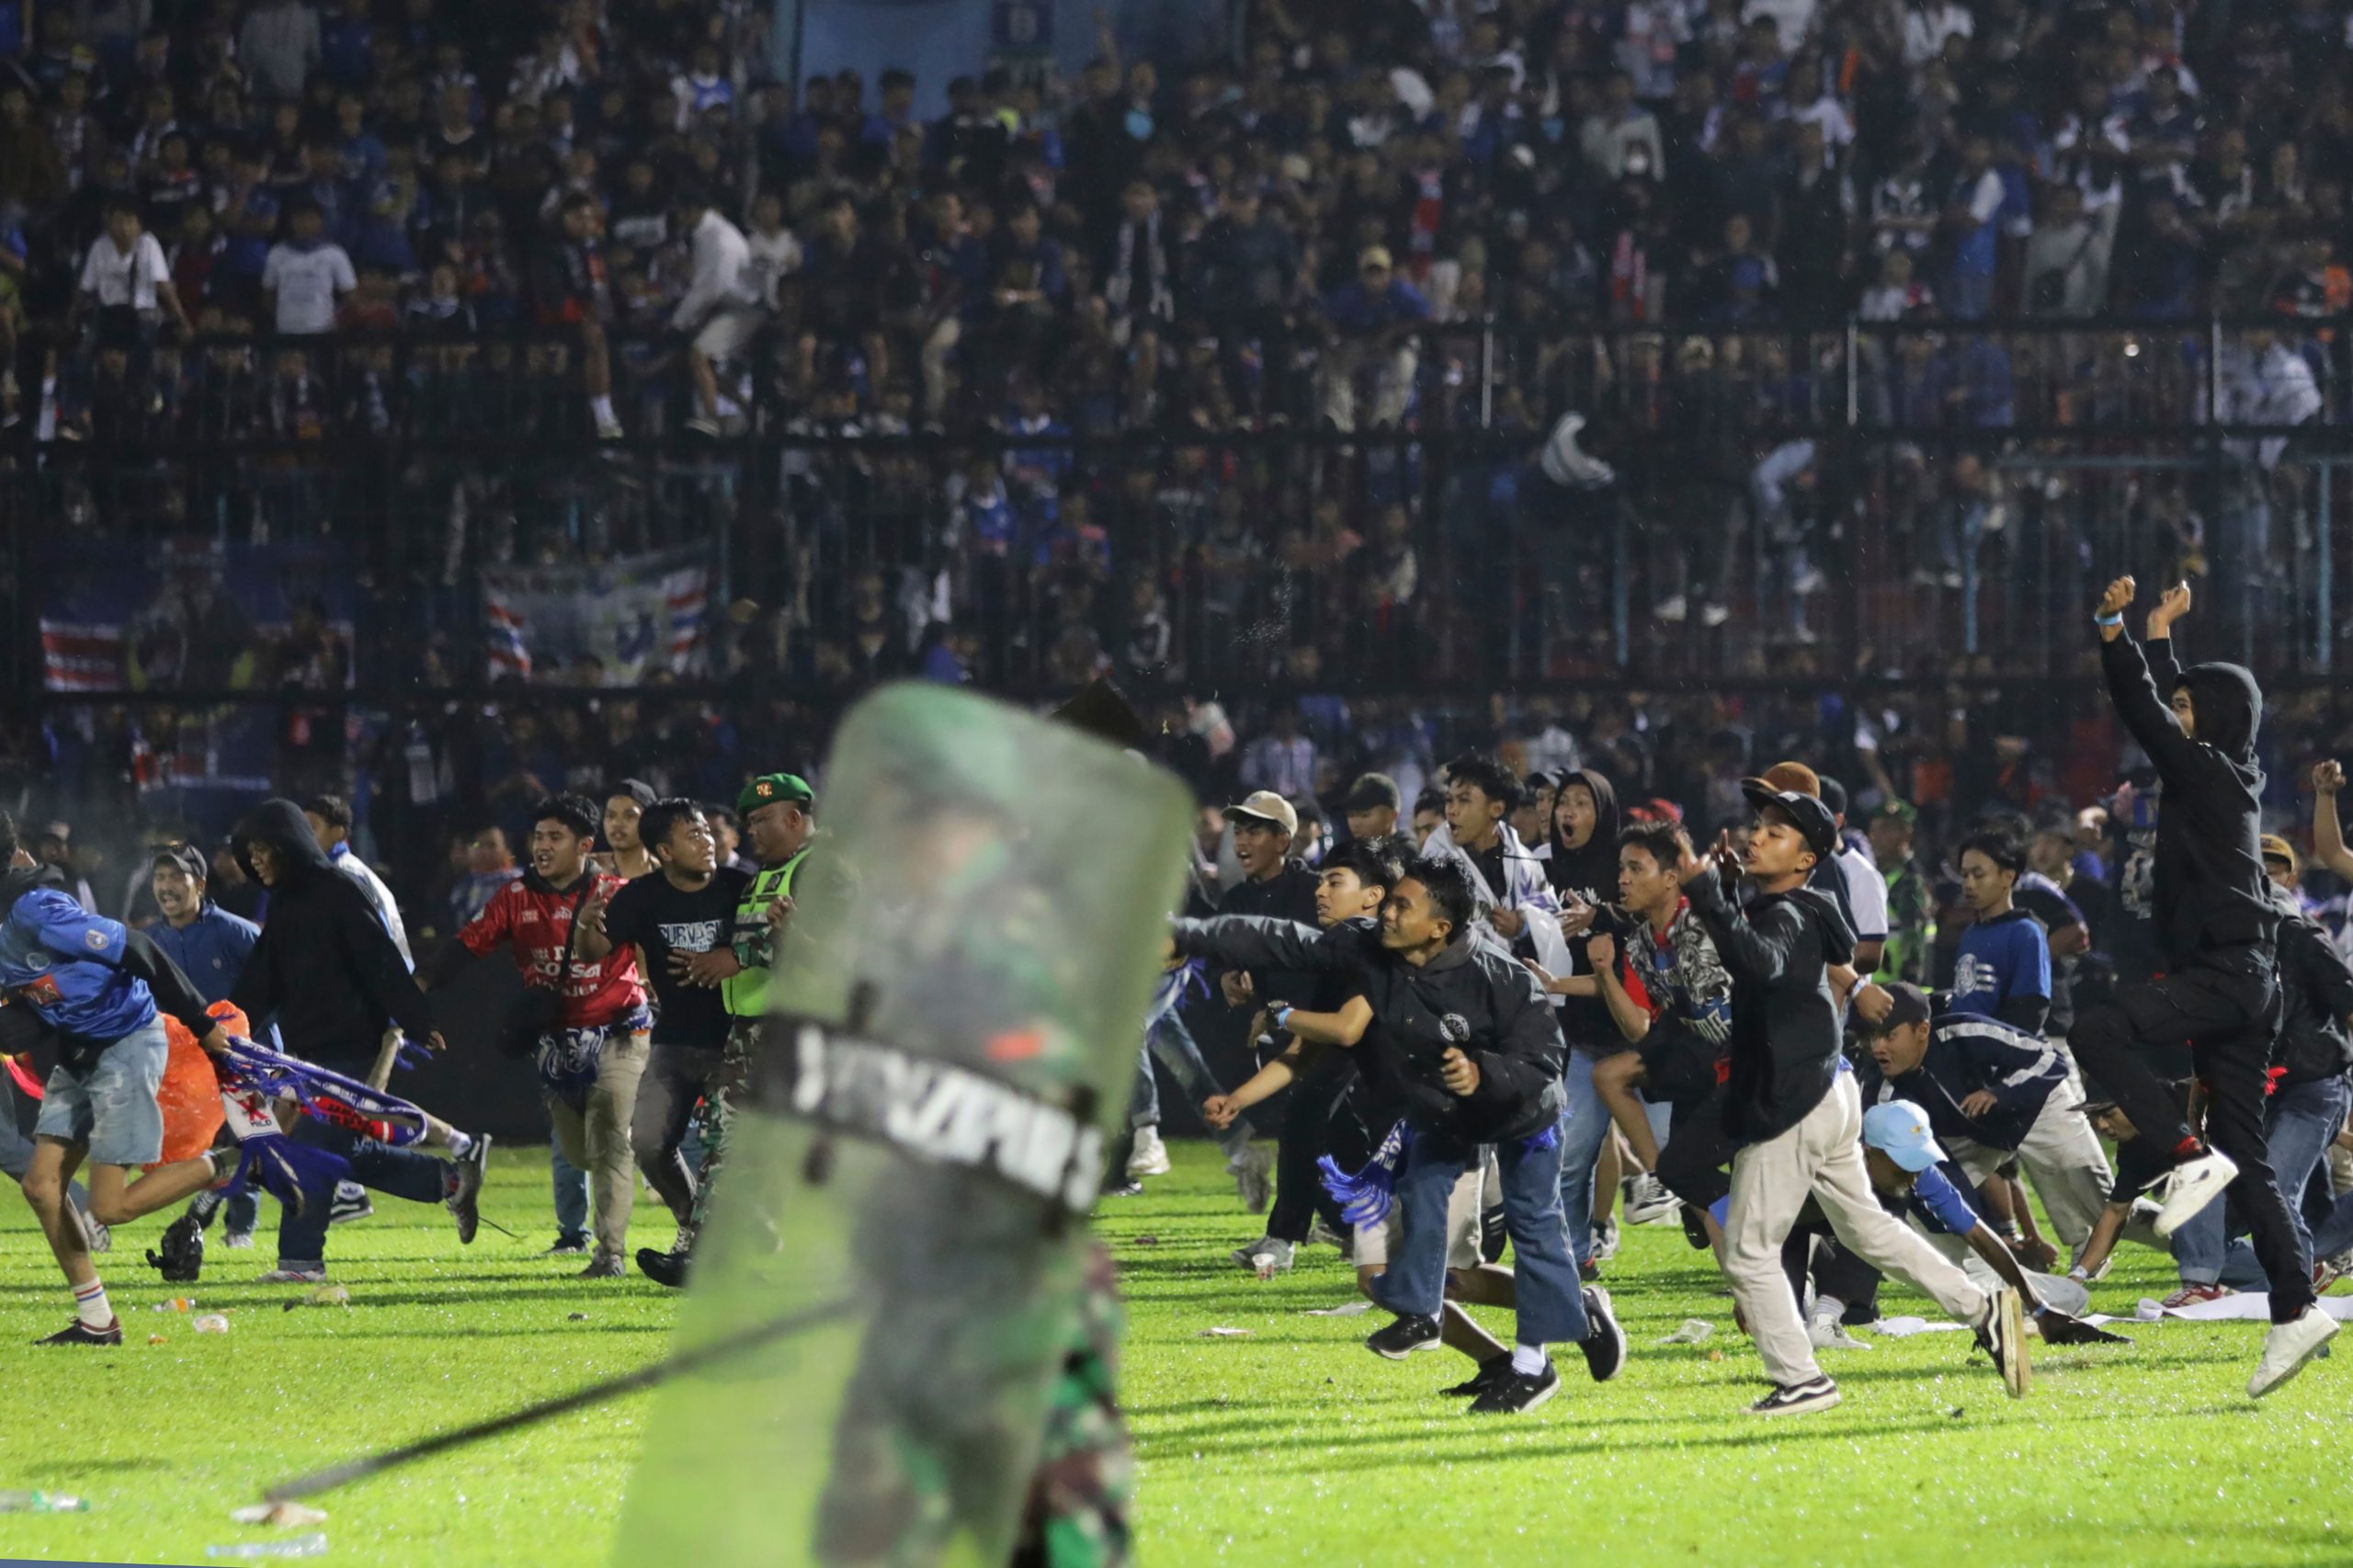 Indonesia Kanjuruhan Stadium stampede: All you need to know